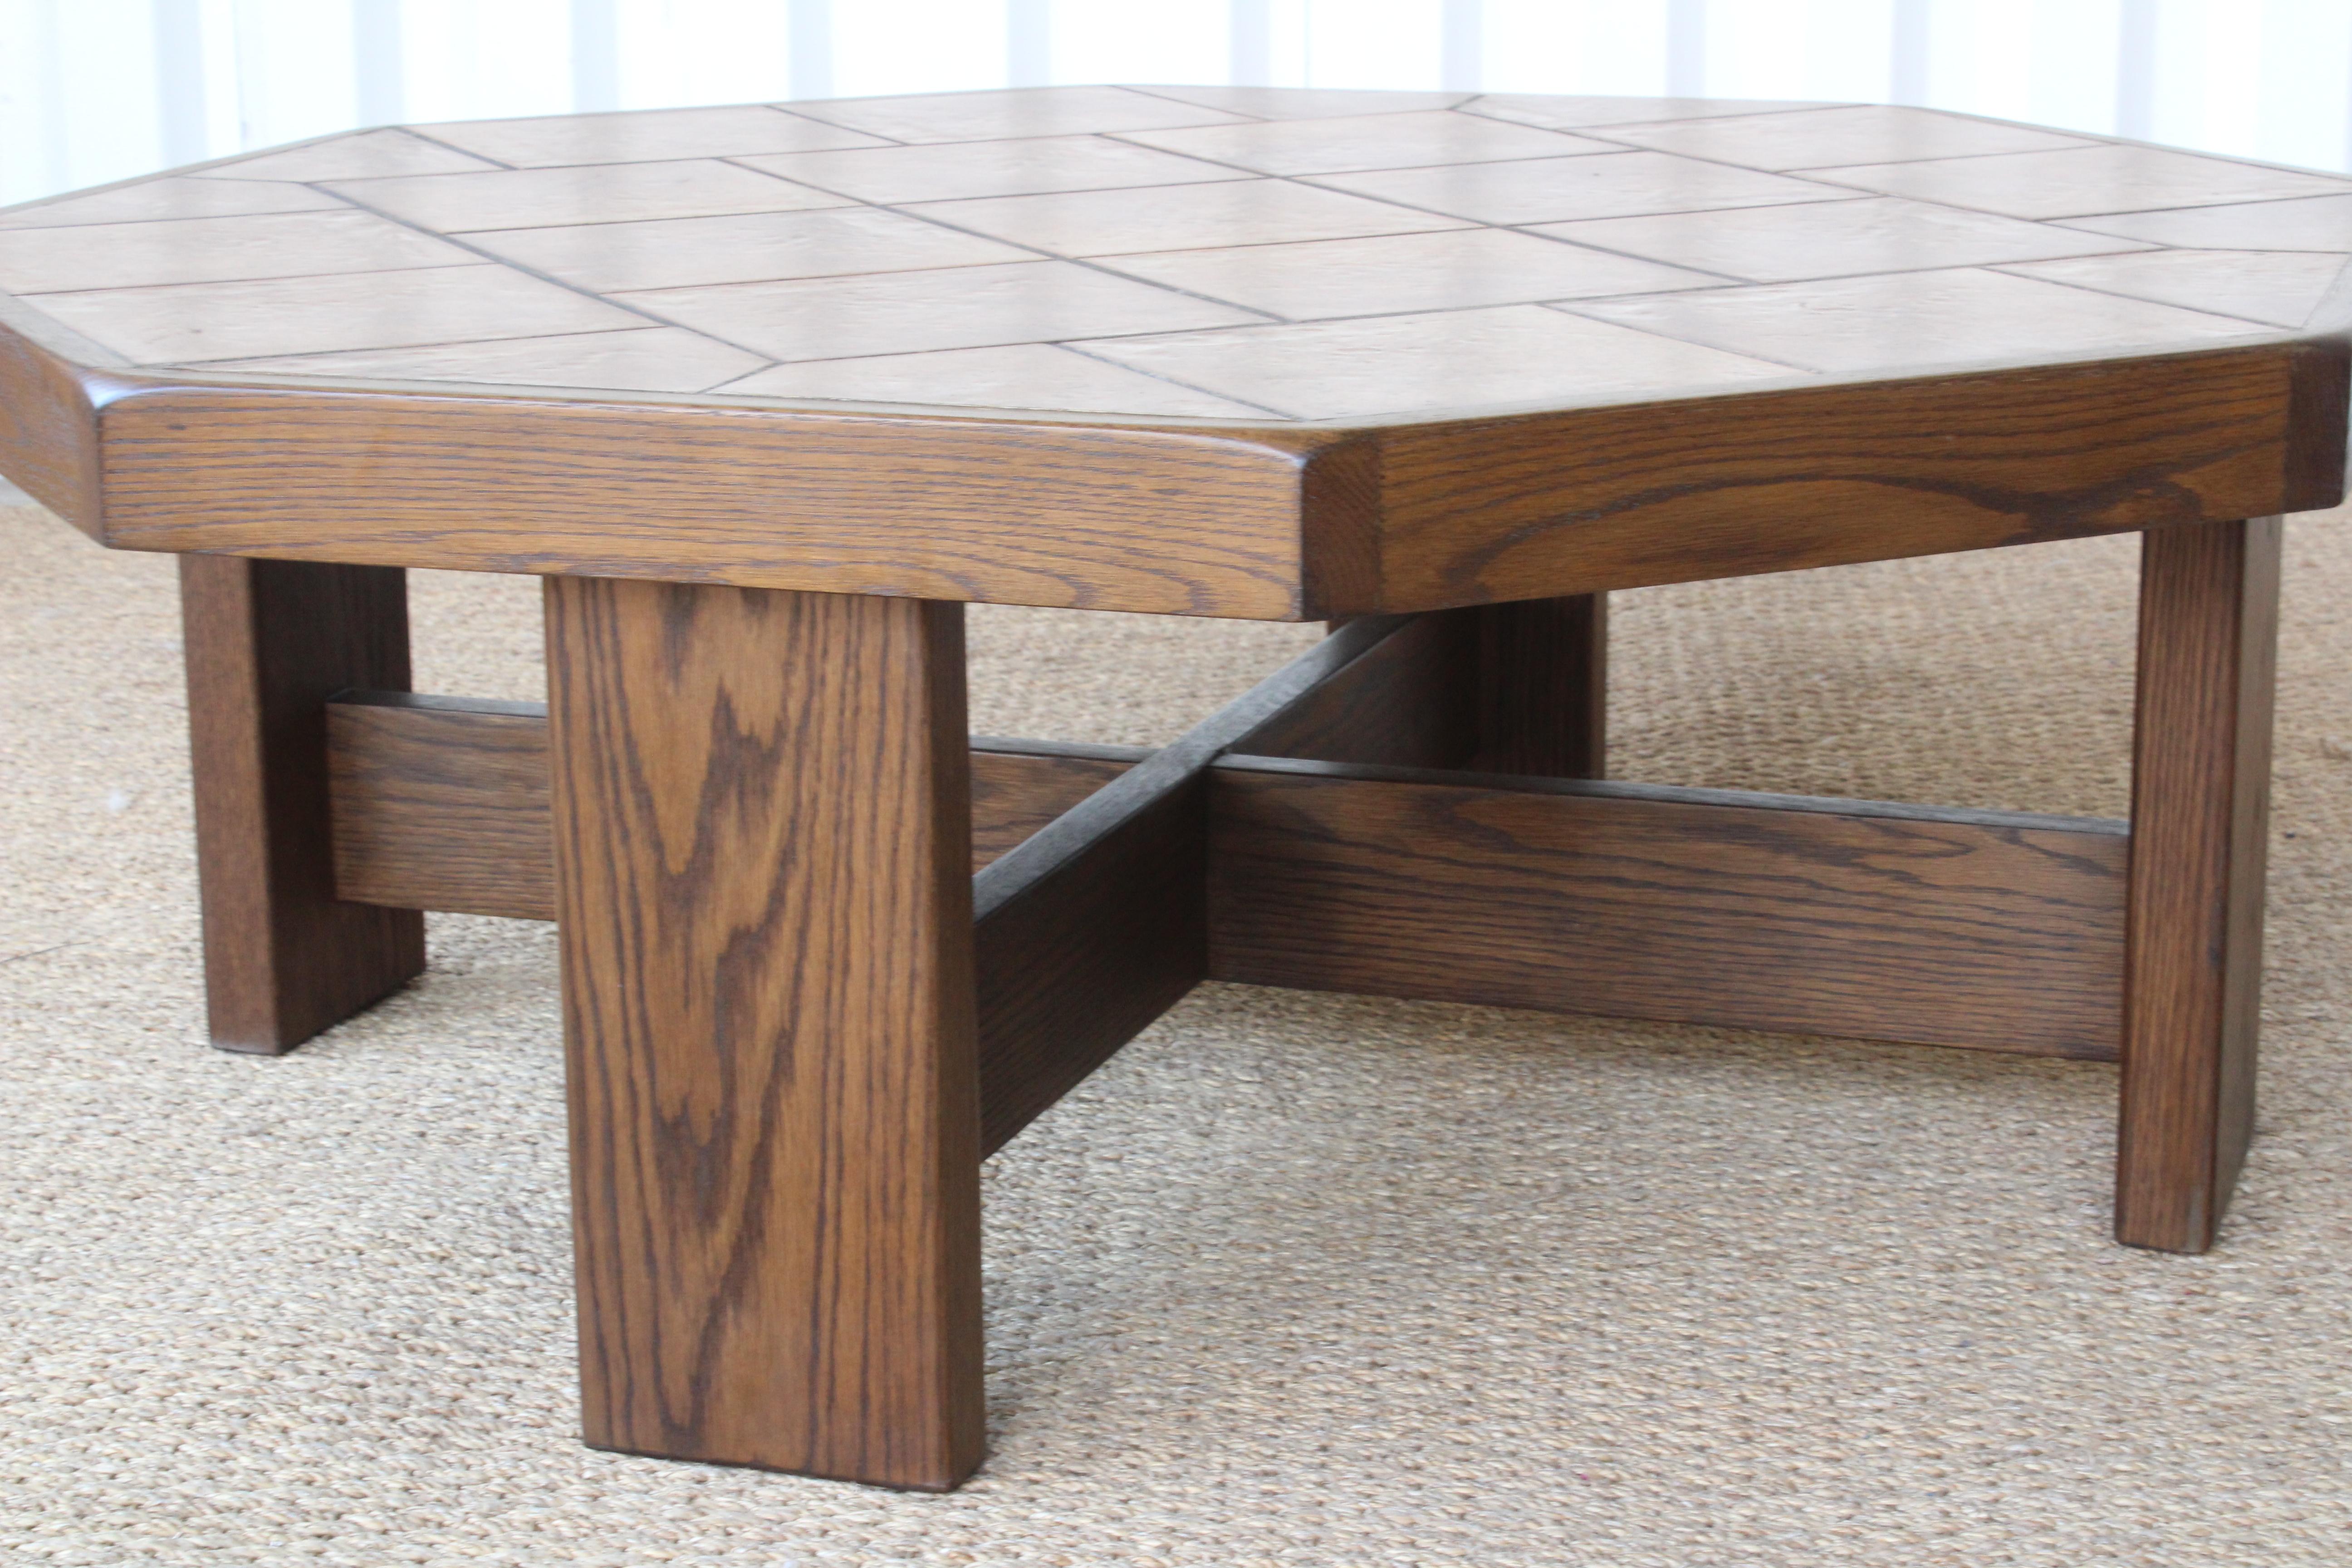 Late 20th Century Oak and Ceramic Tile Coffee Table, France, 1970s